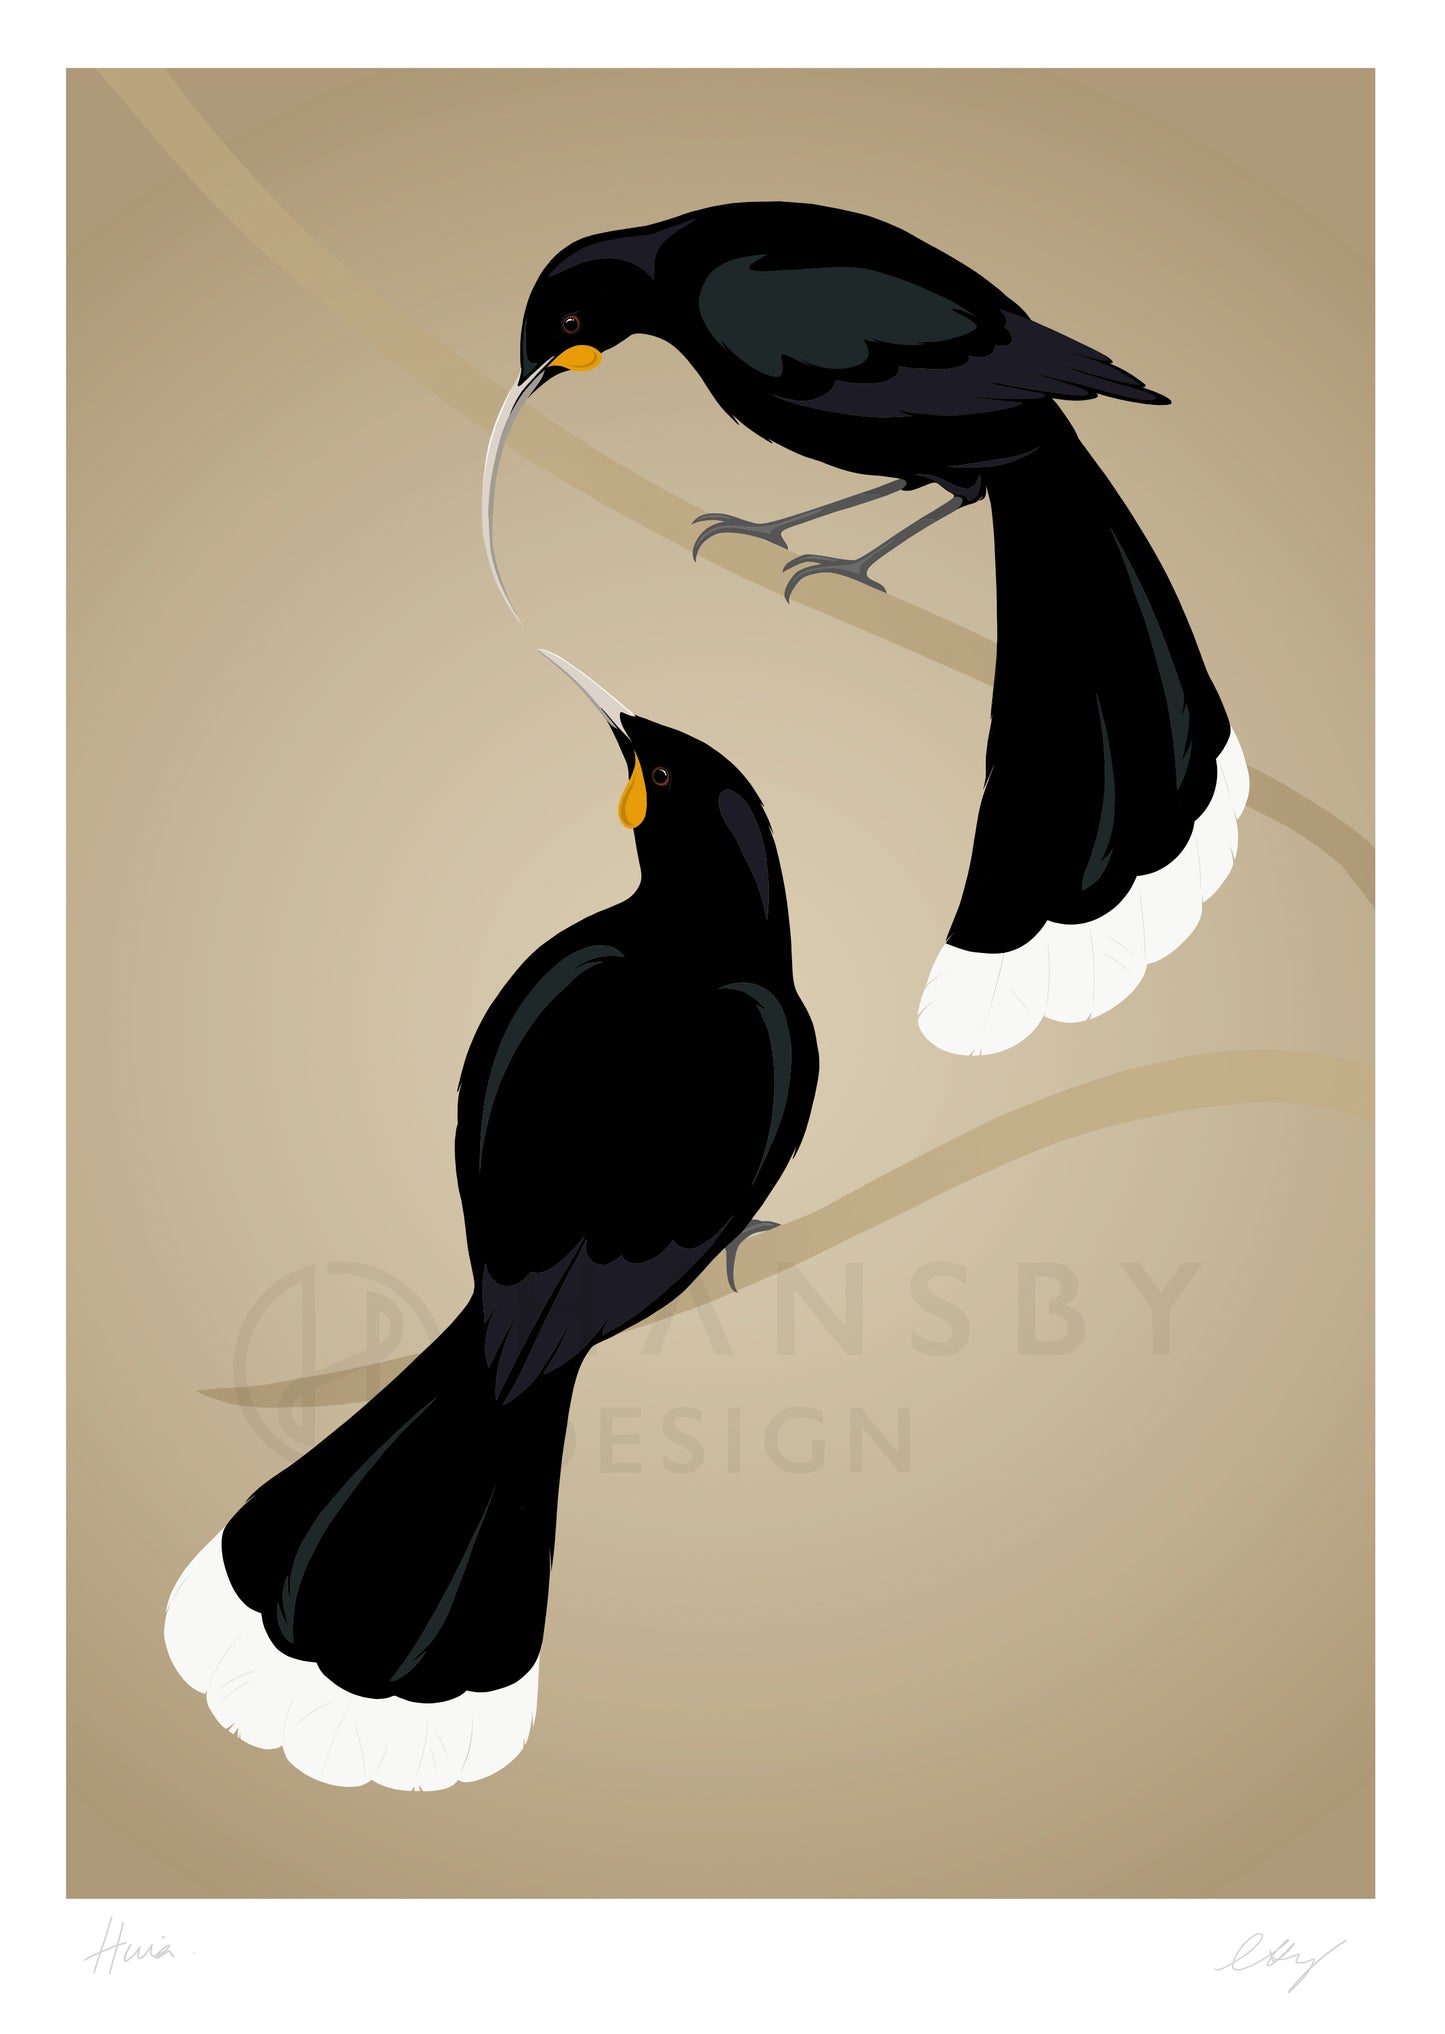 Art print of the Huia pair, by Hansby Design New Zealand